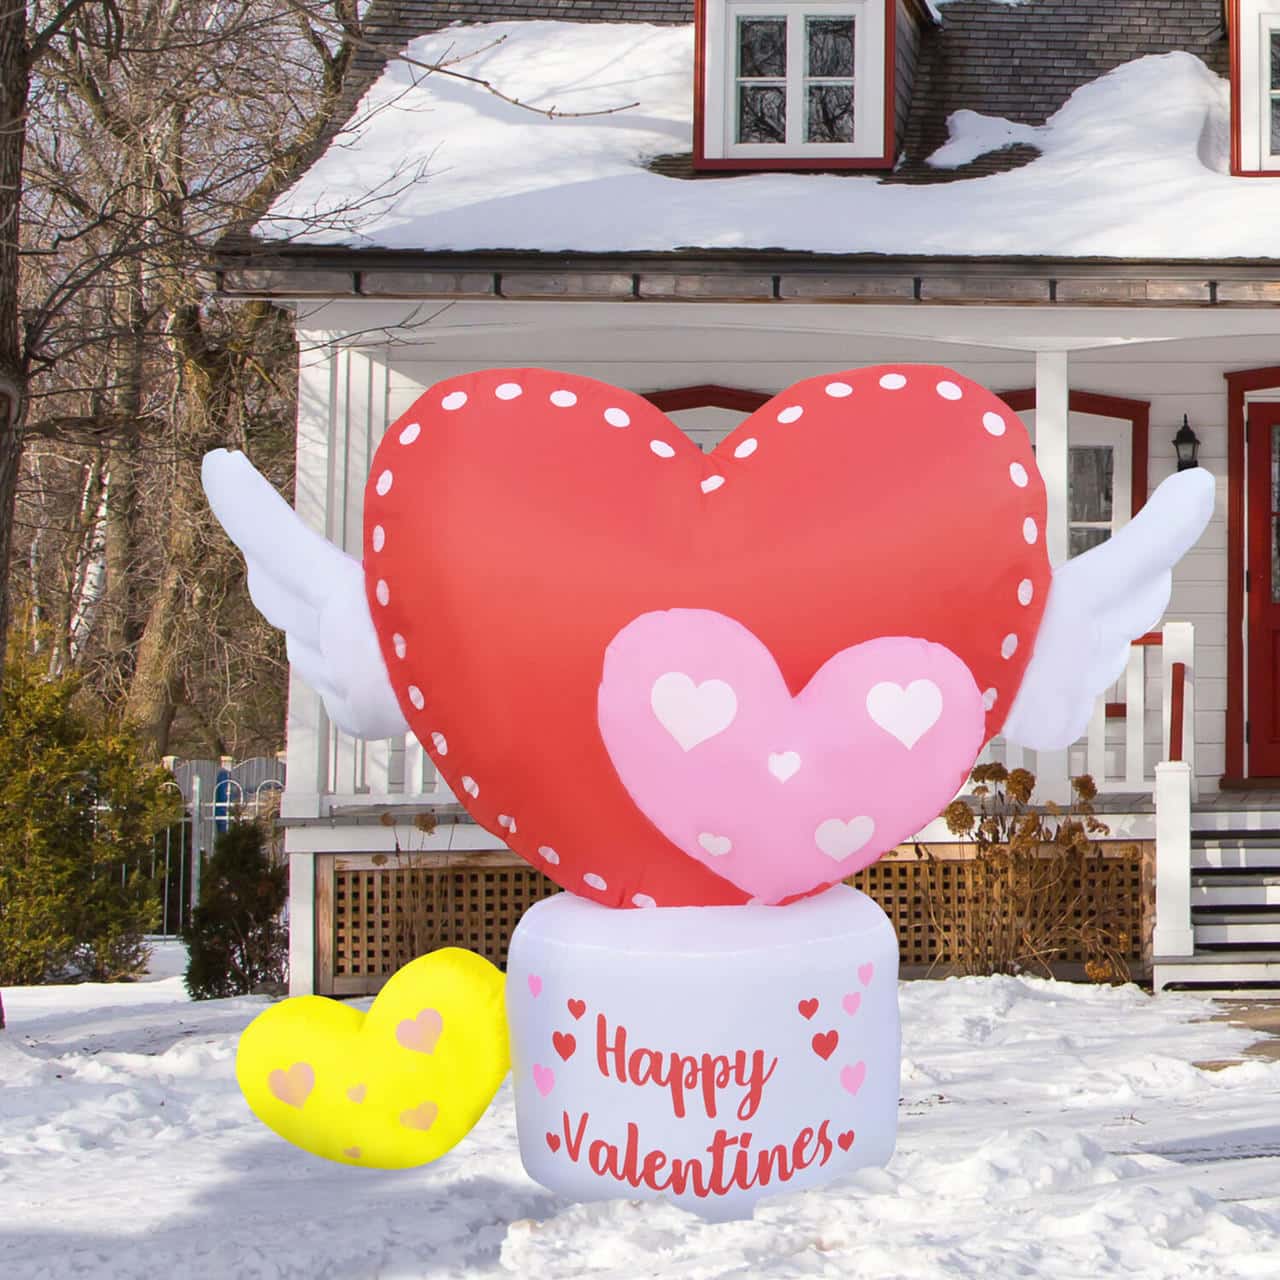 How Can Inflatable Decorations Amplify Valentine’s Day Romance?